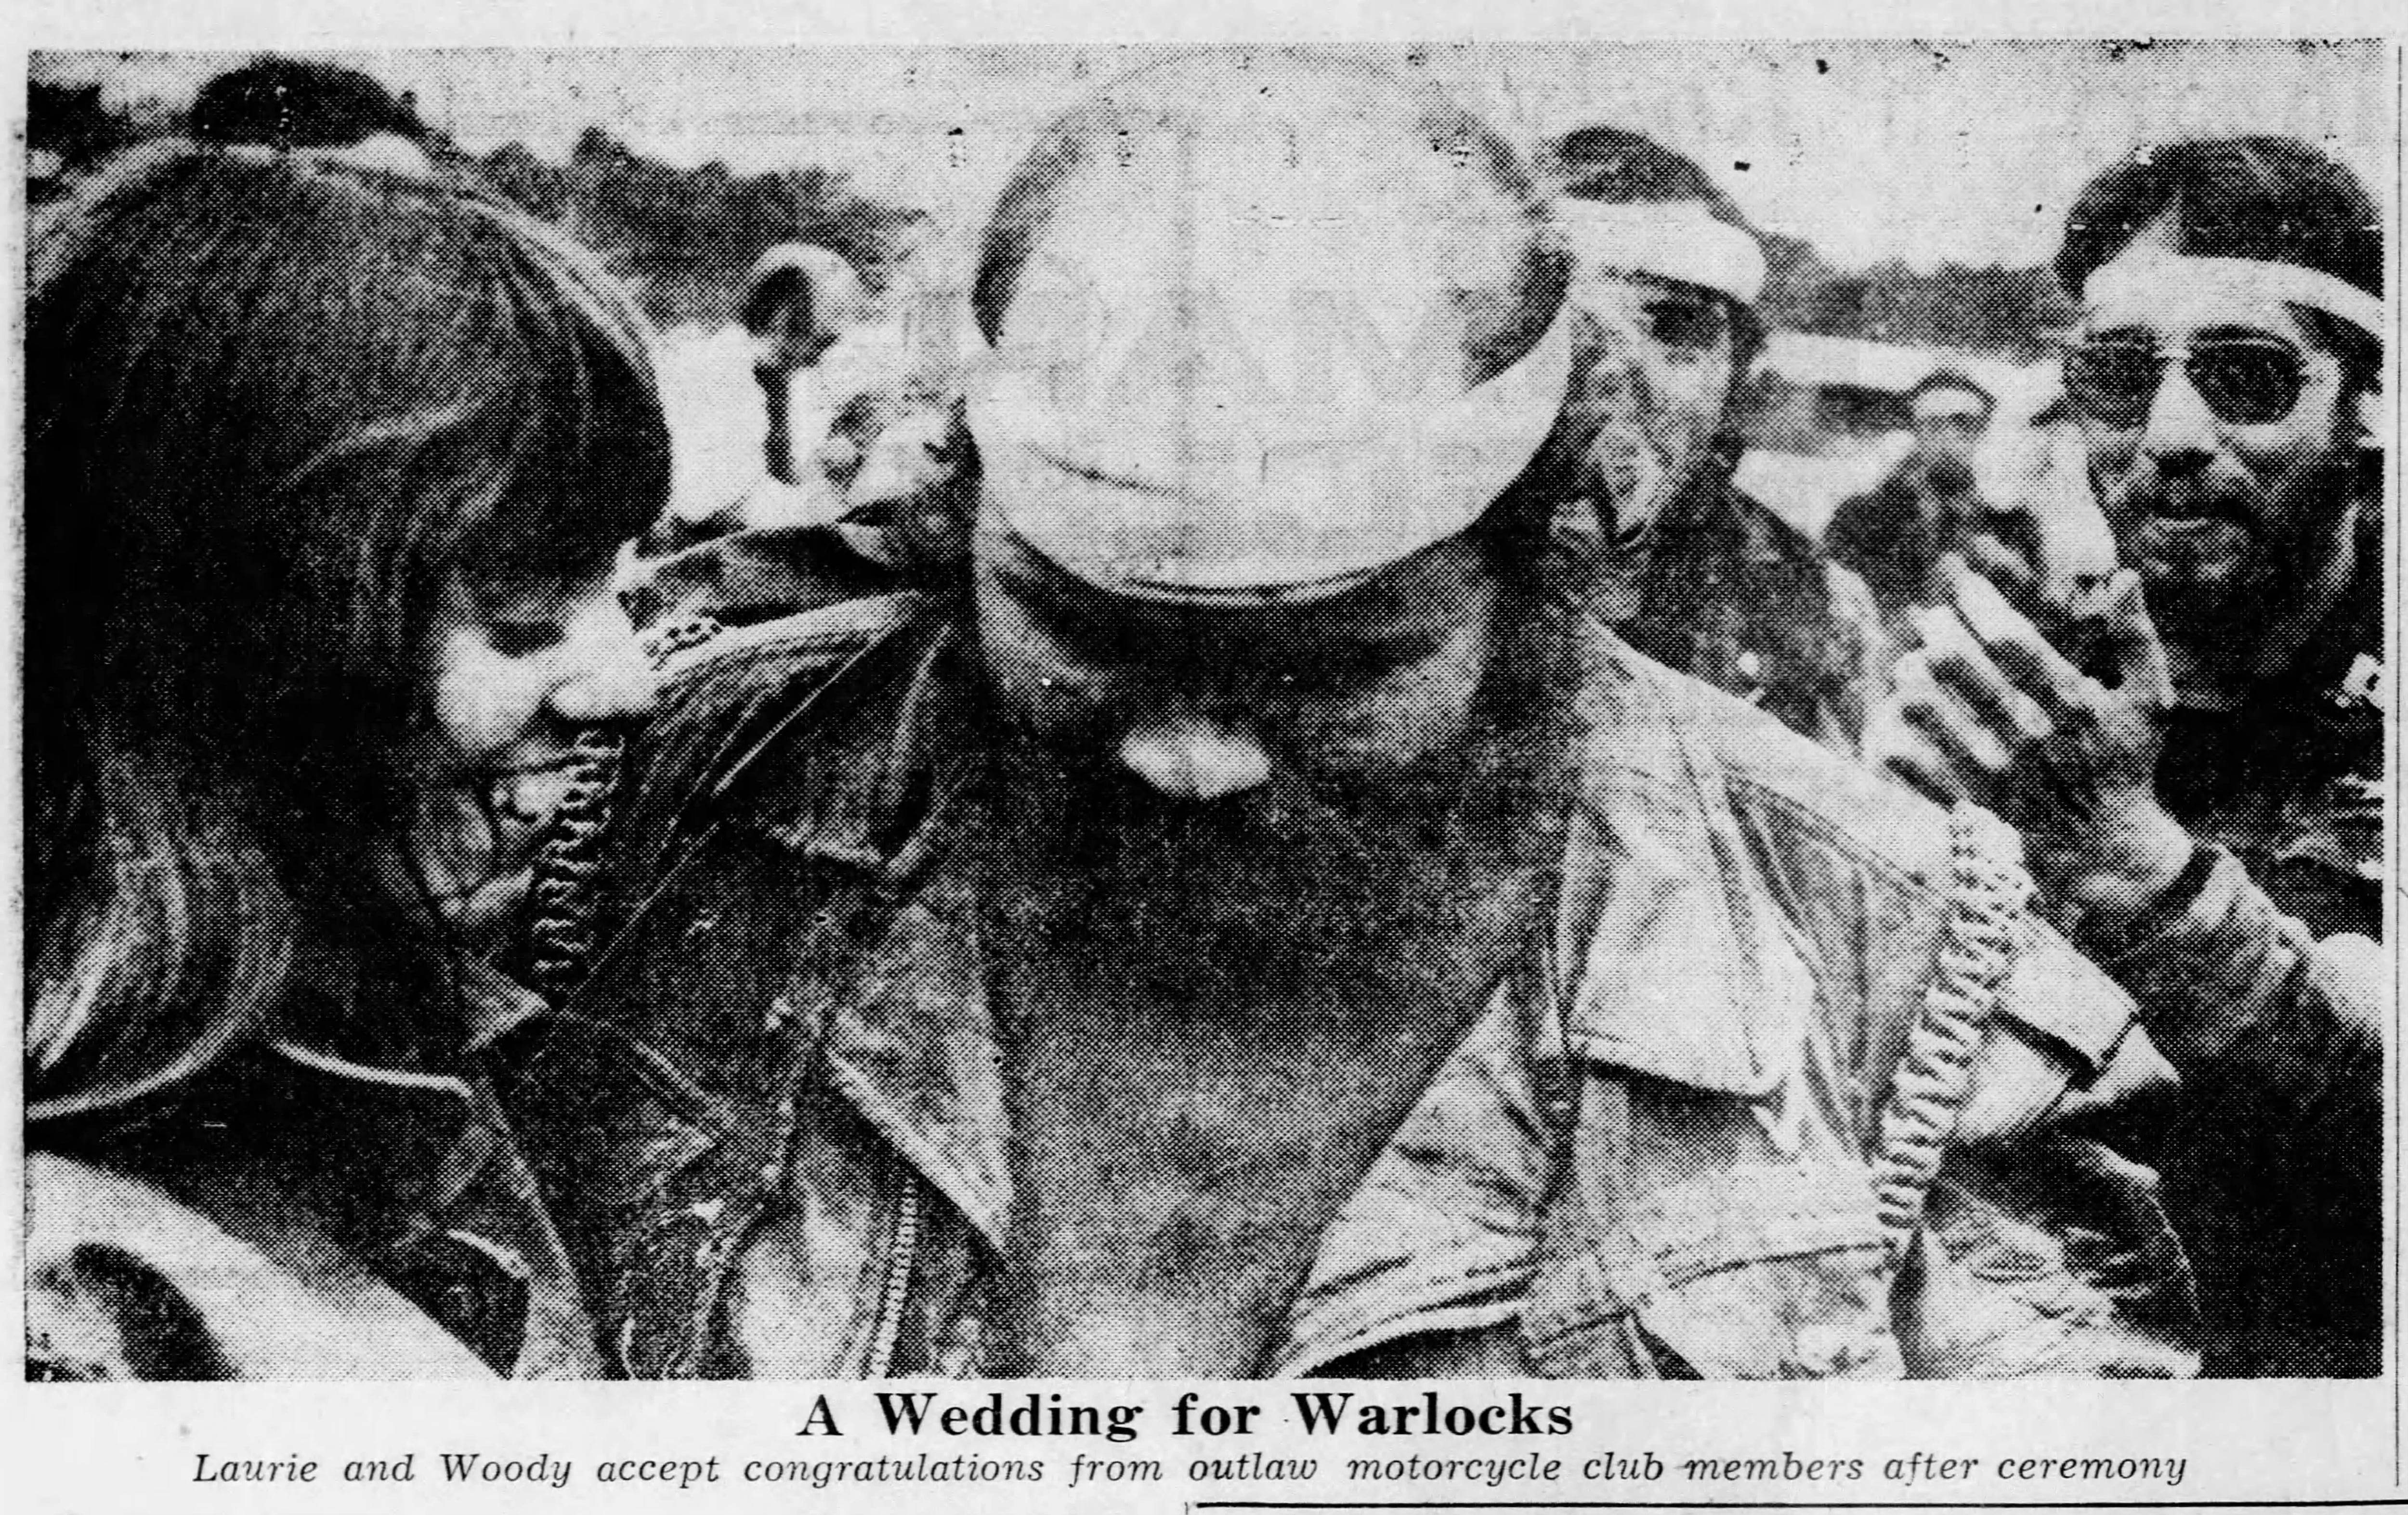 Laurie and Woody's nuptials as pictured in a Nov. 7, 1971, edition of The Inquirer.